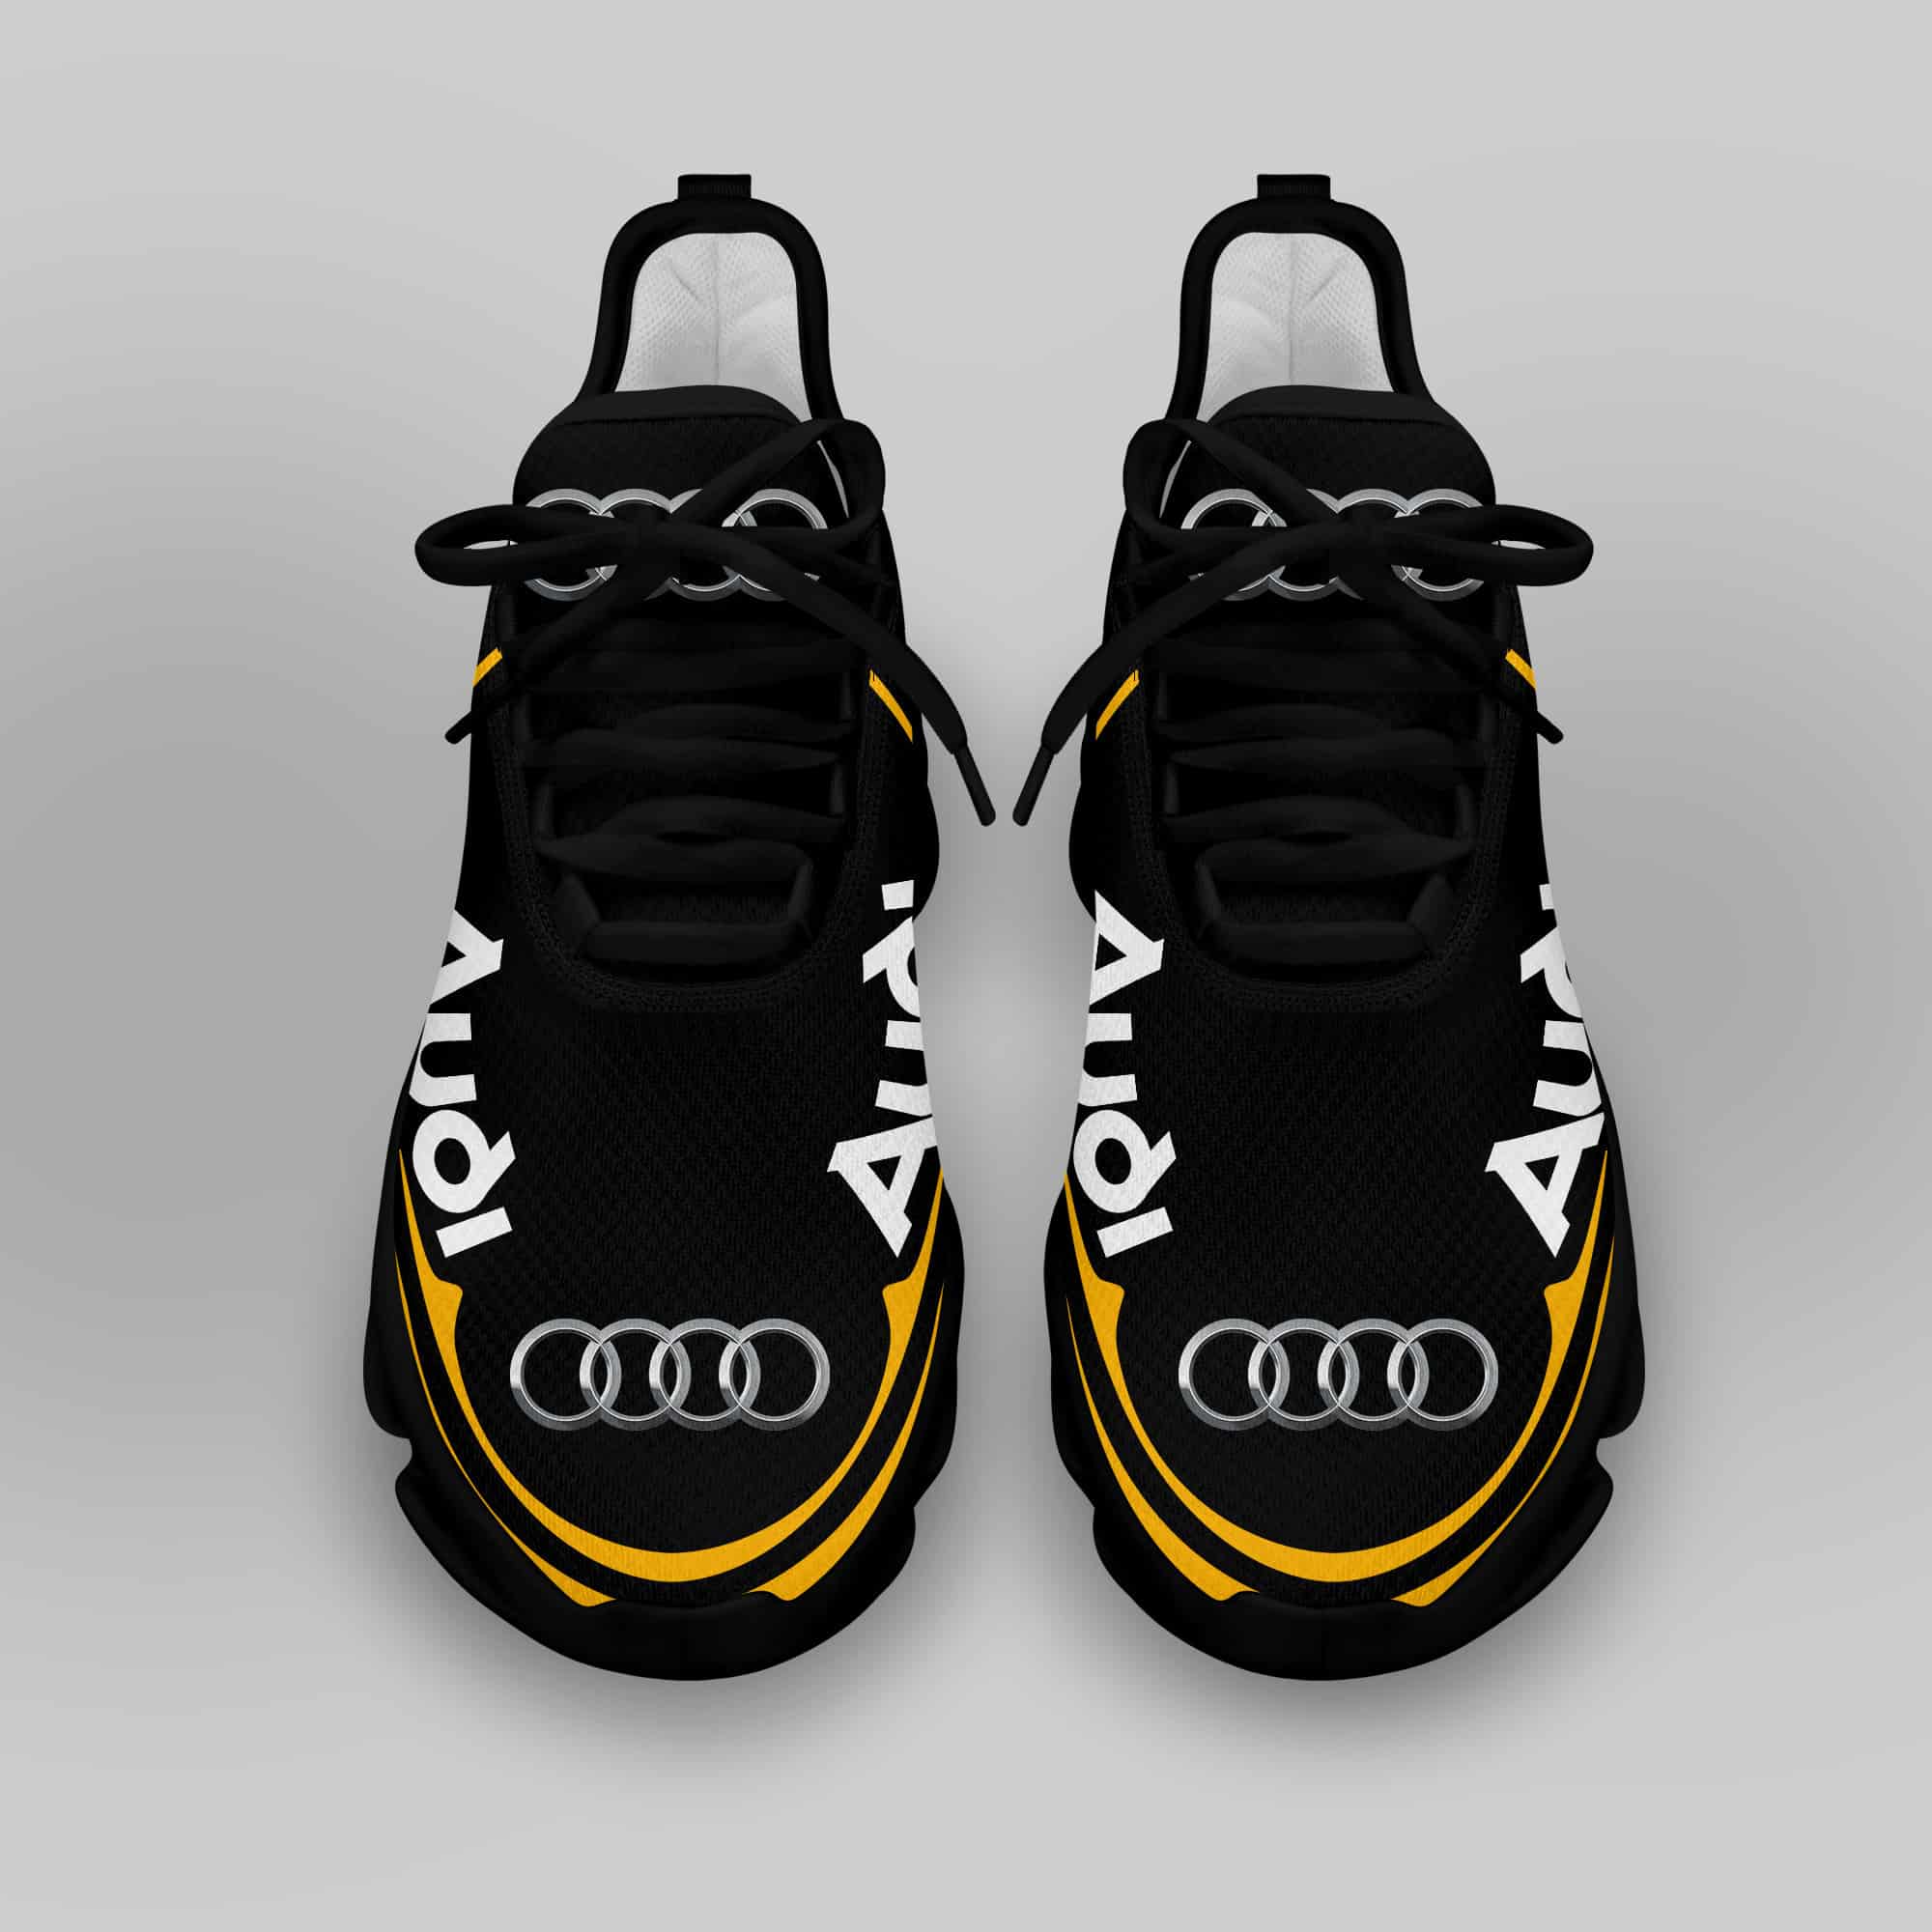 Audi Sport Running Shoes Max Soul Shoes Sneakers Ver 45 4